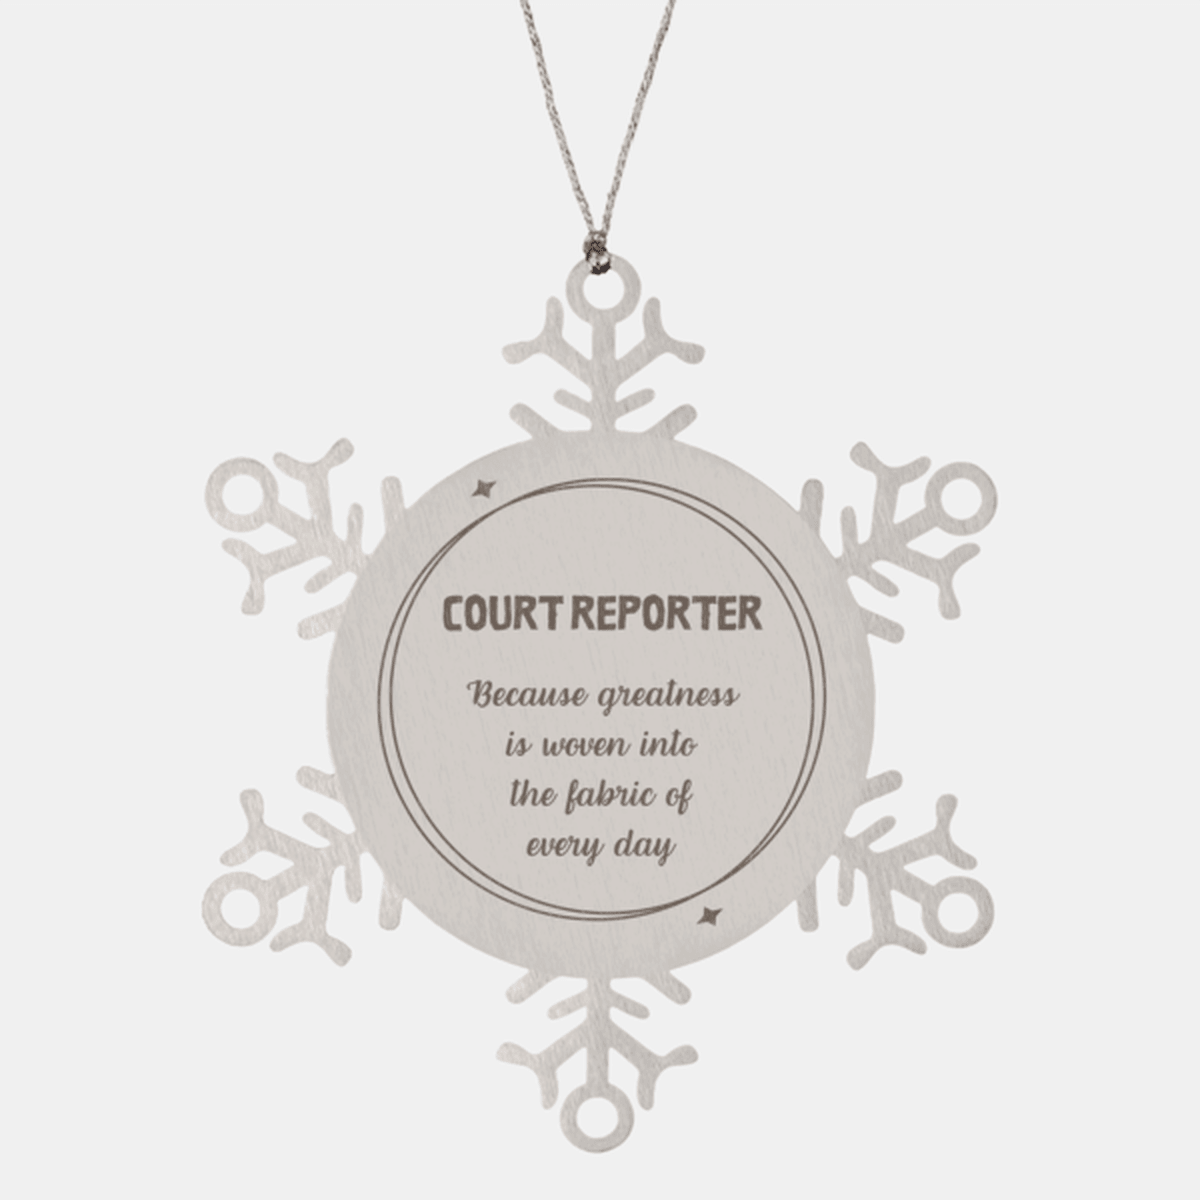 Sarcastic Court Reporter Snowflake Ornament Gifts, Christmas Holiday Gifts for Court Reporter Ornament, Court Reporter: Because greatness is woven into the fabric of every day, Coworkers, Friends - Mallard Moon Gift Shop